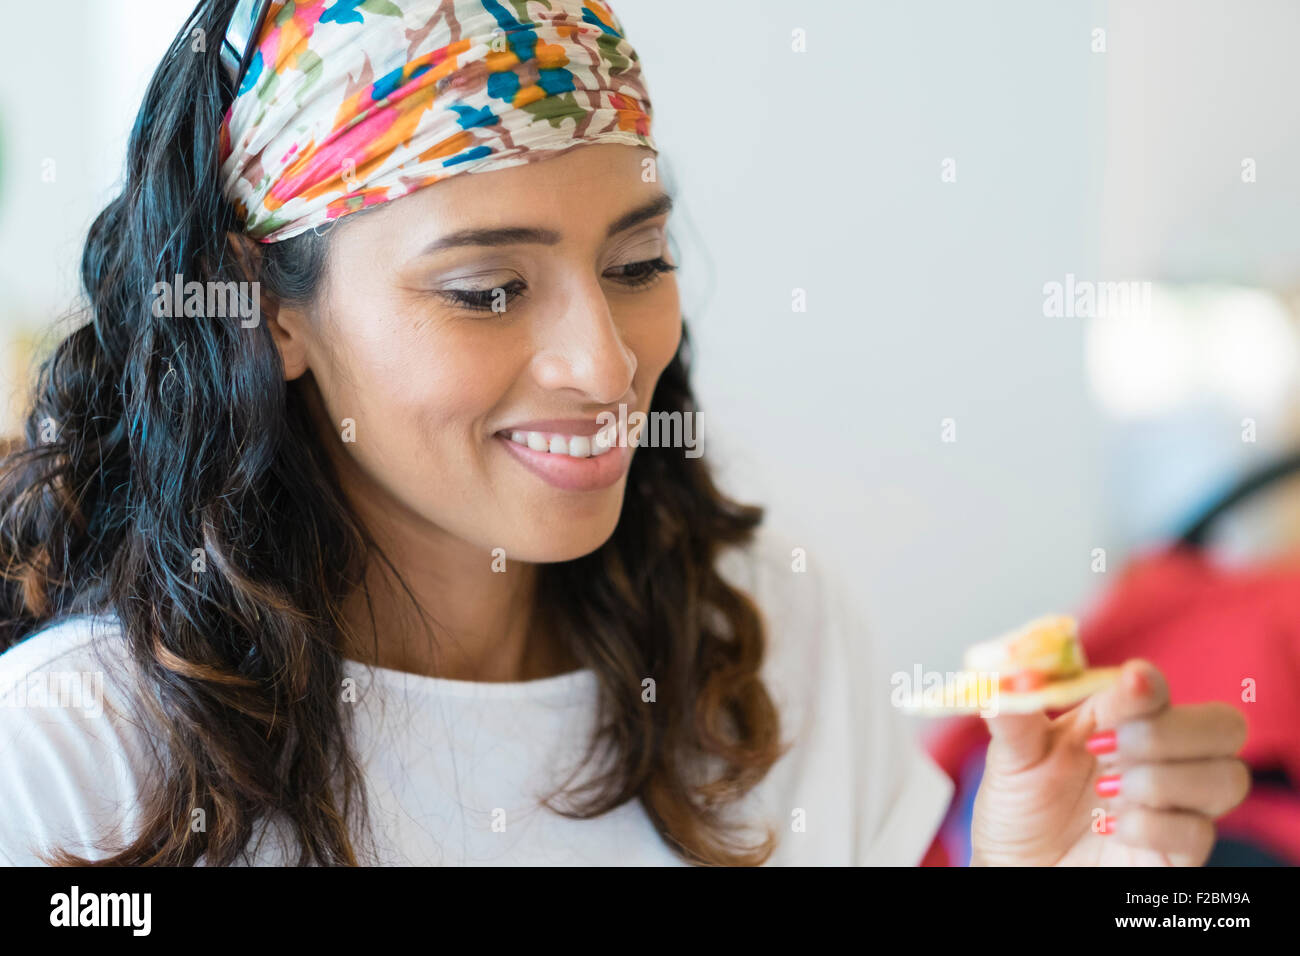 Frau mit Hors d ' oeuvres snack Stockfoto